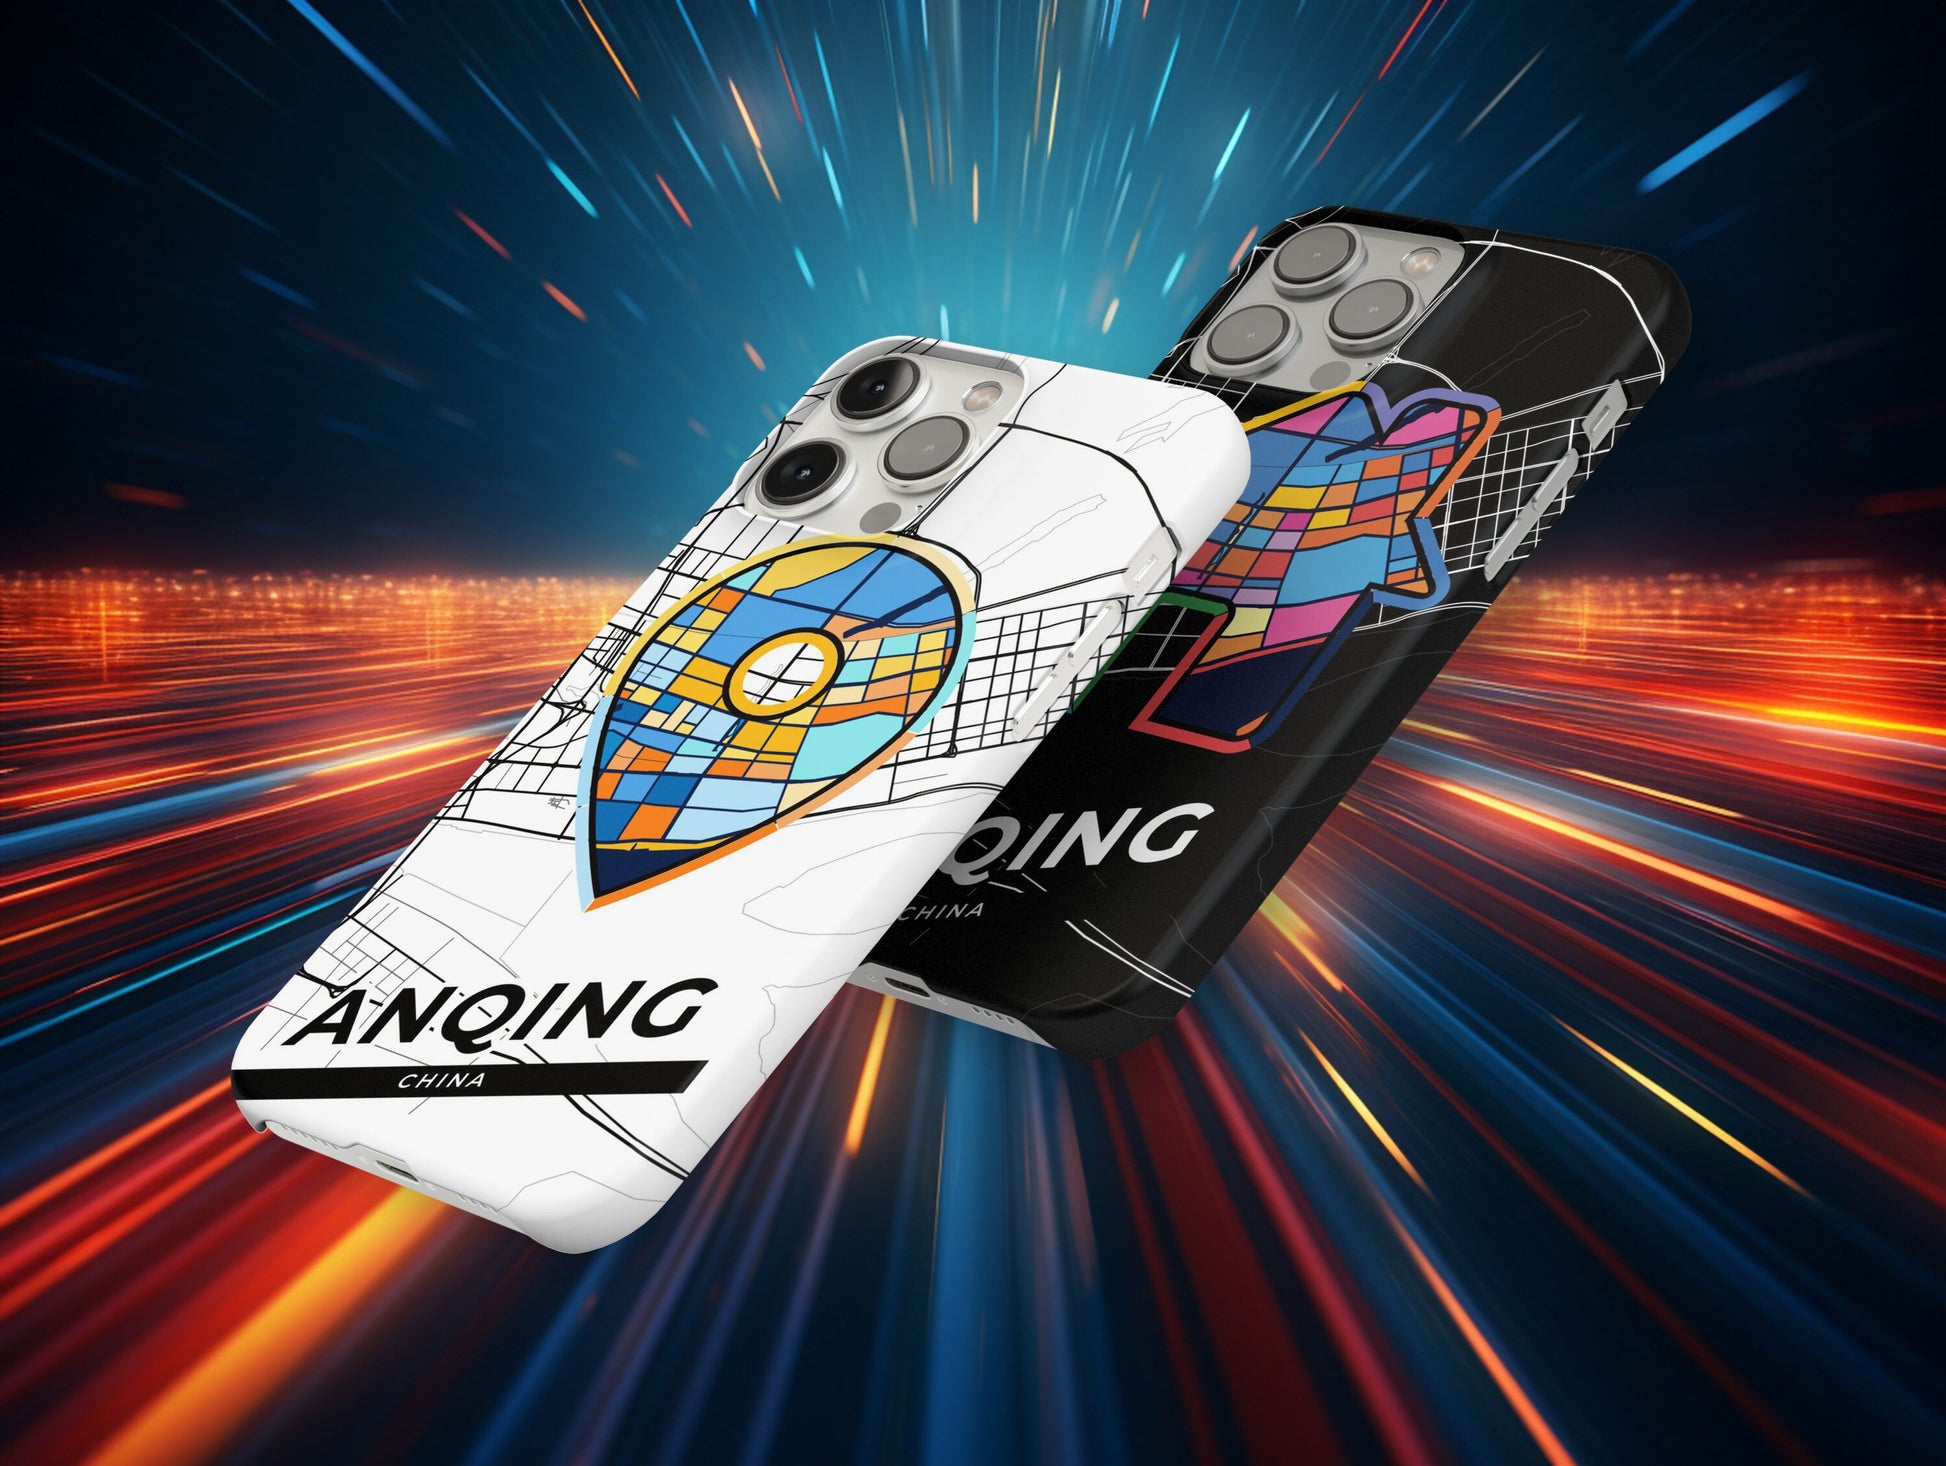 Anqing China slim phone case with colorful icon. Birthday, wedding or housewarming gift. Couple match cases.